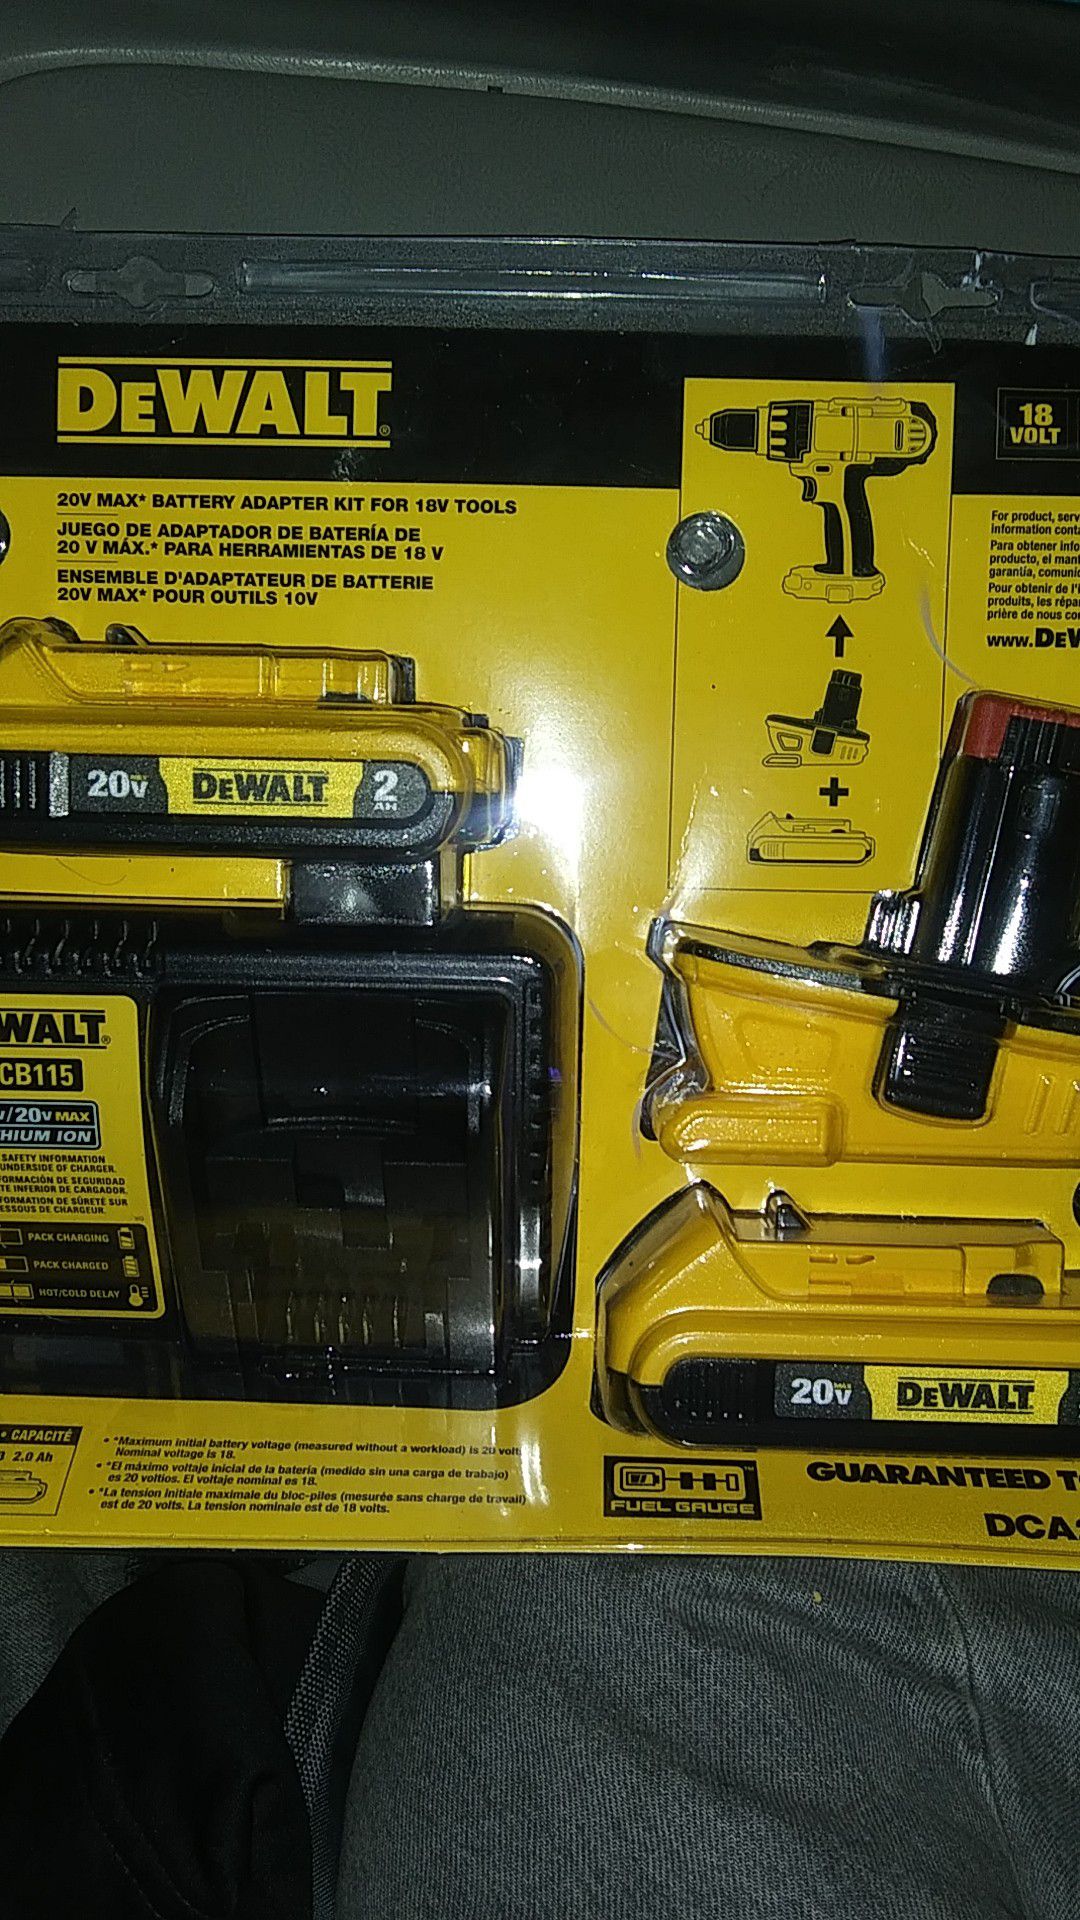 Dewalt 2 pack of batteries complete with 12v/20v charger and battery adapter.plus I can throw in a extra brand new 12v battery